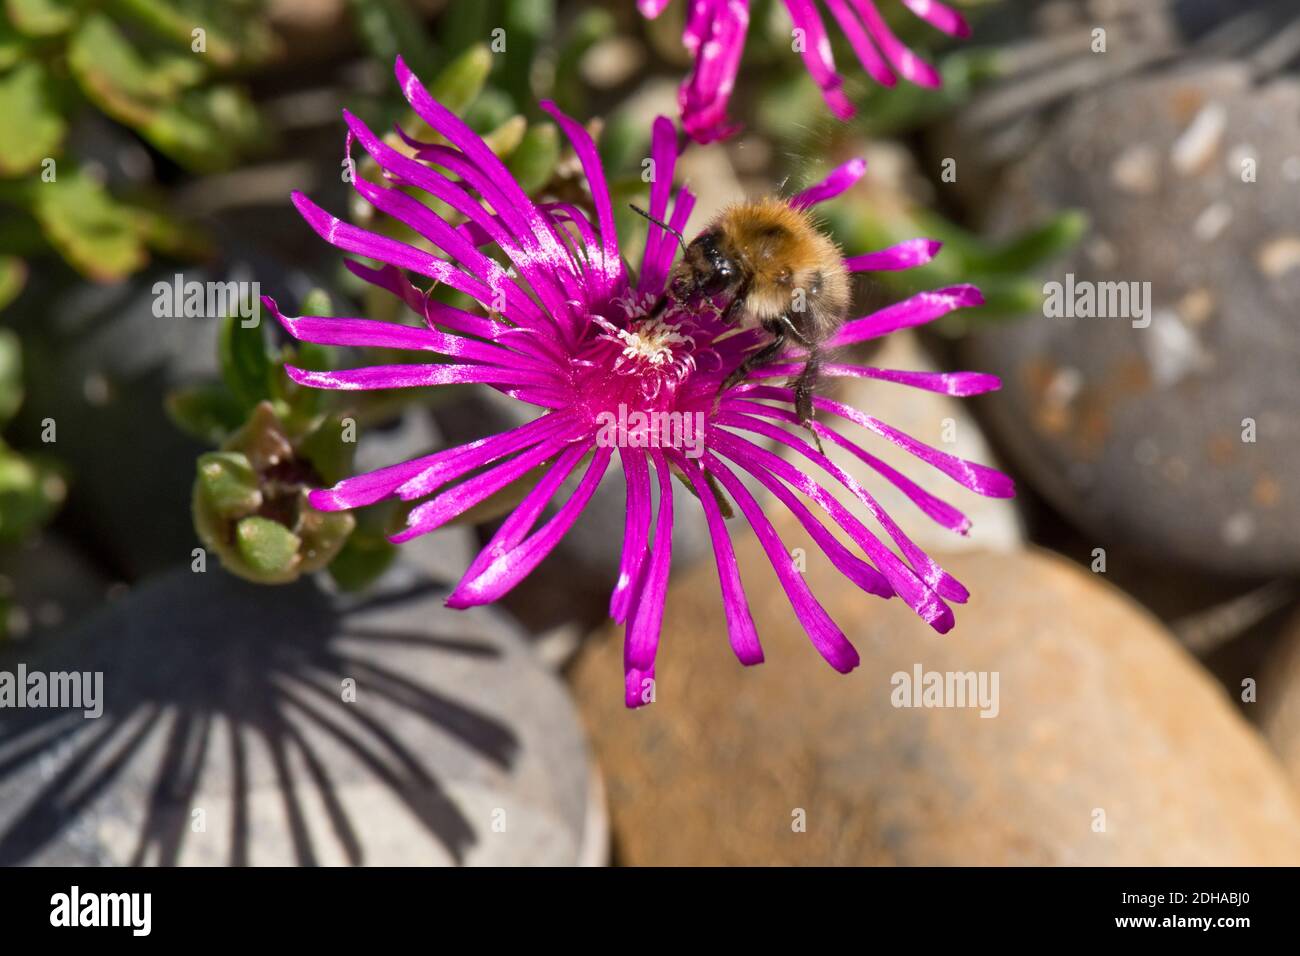 Common carder bee (Bombus pascuorum) on a pink ice plant (Mesembryanthemum sp.) flower, Berkshire, July Stock Photo